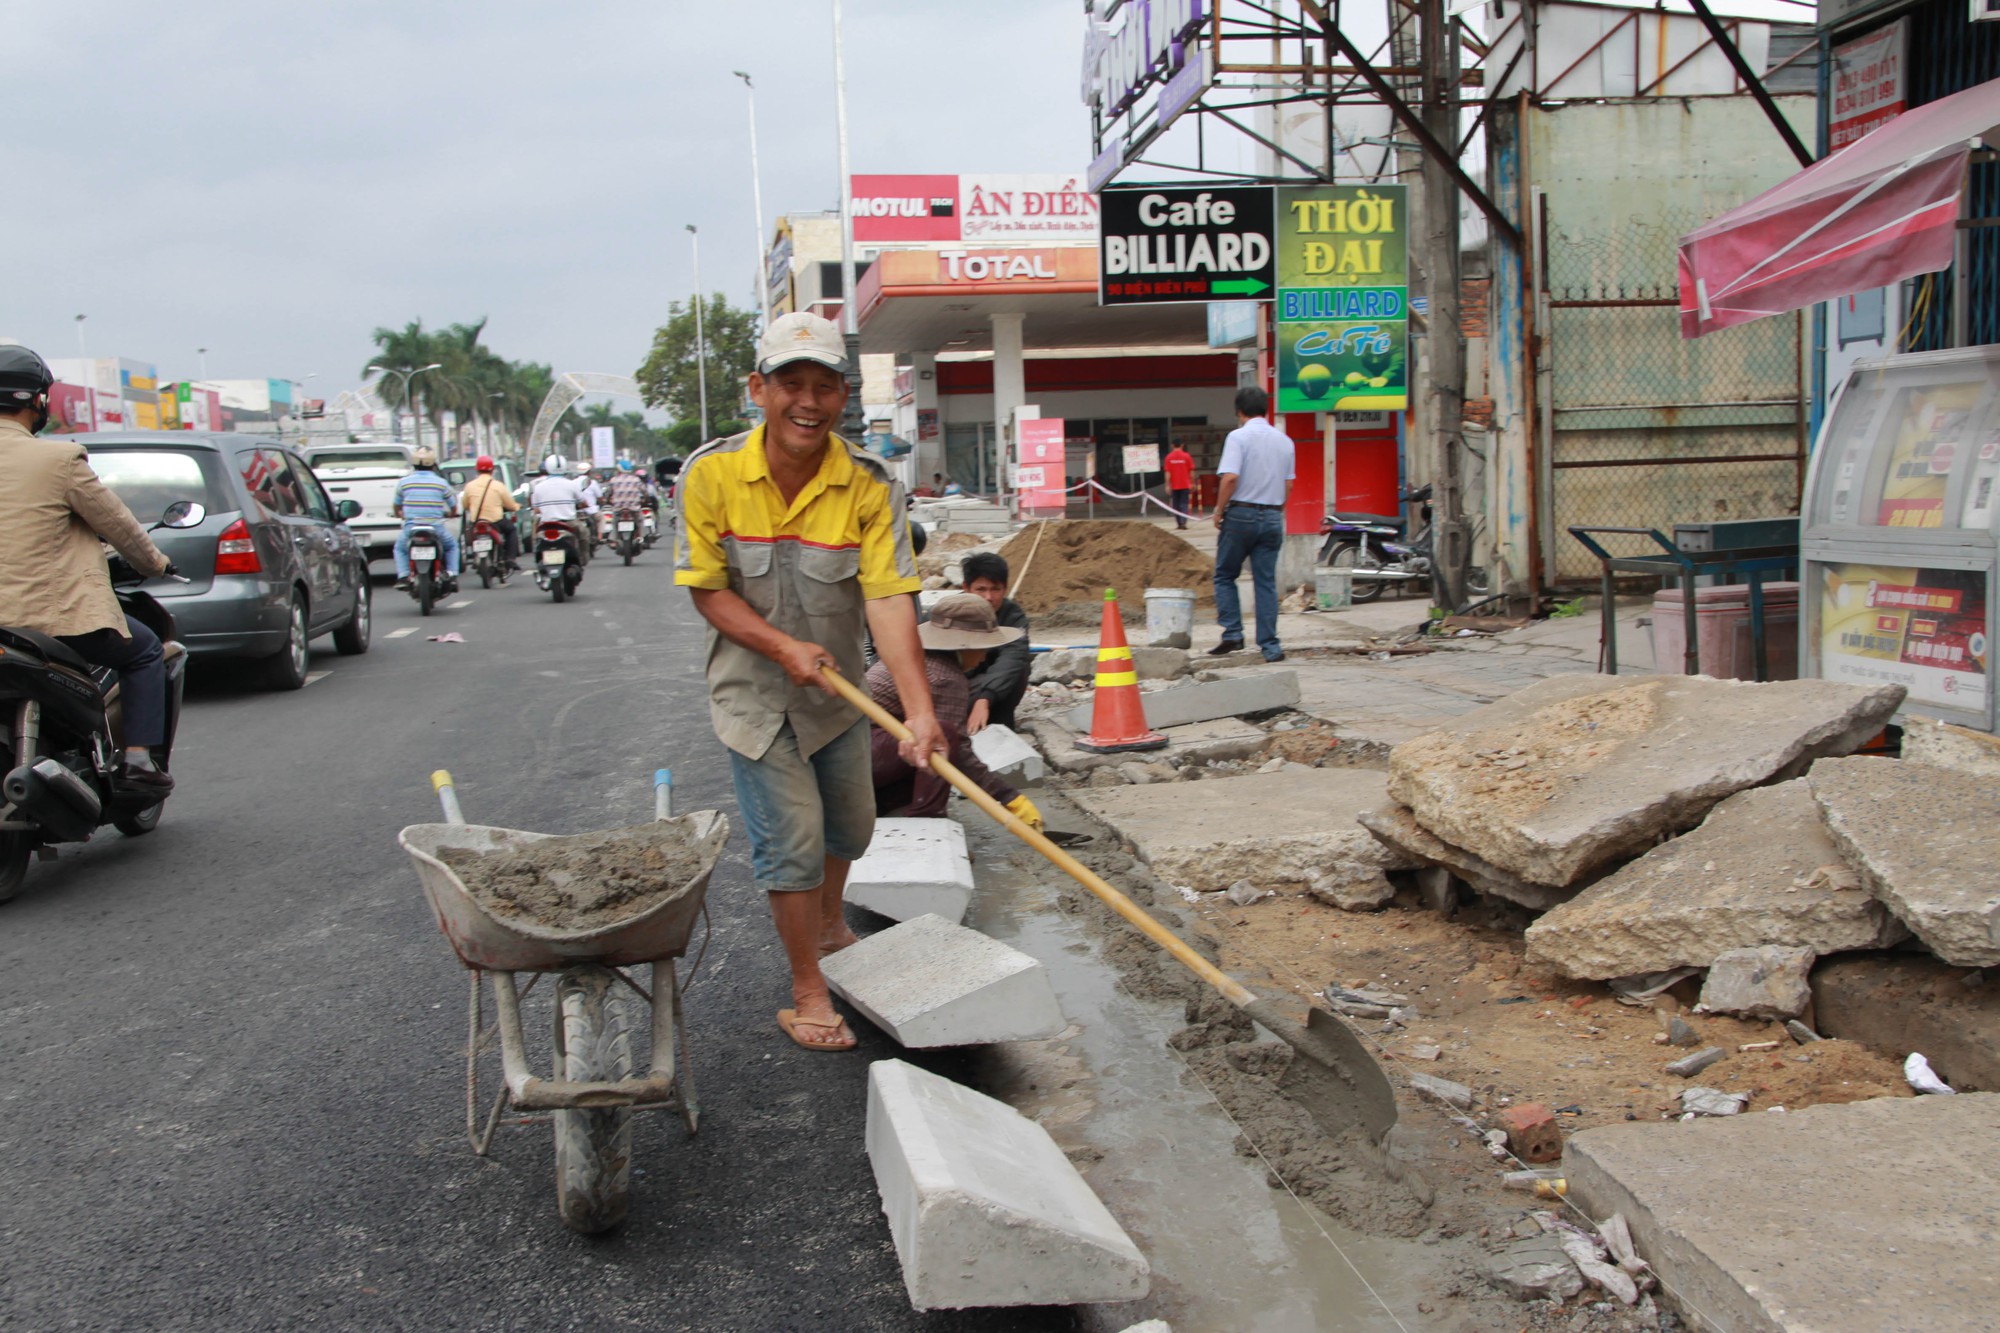 The construction of the sidewalks being completed. Photo: Tuoi Tre